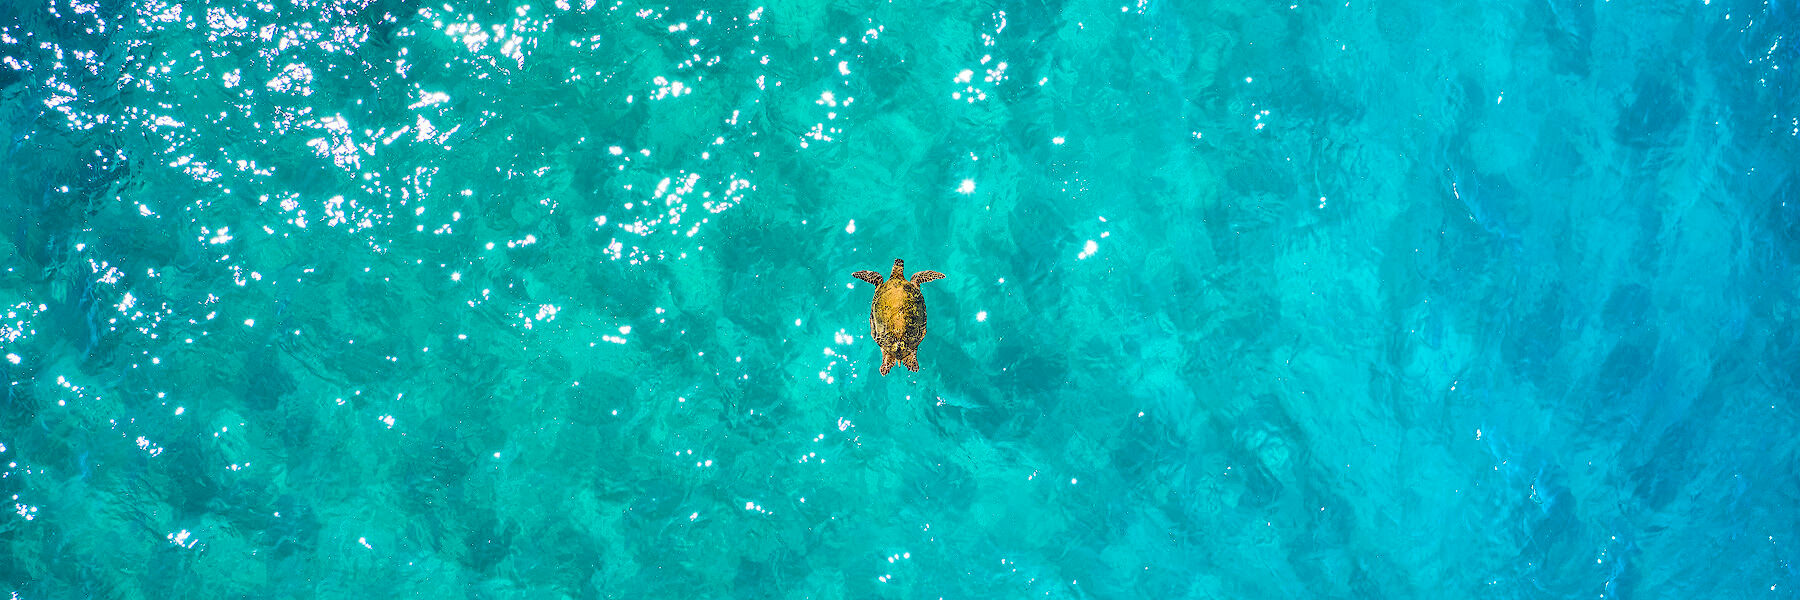 A lone Hawaiian sea turtle floating in amazing emerald colored Maui water.  Ocean fine art photography by Hawaii artist Andrew Shoemaker